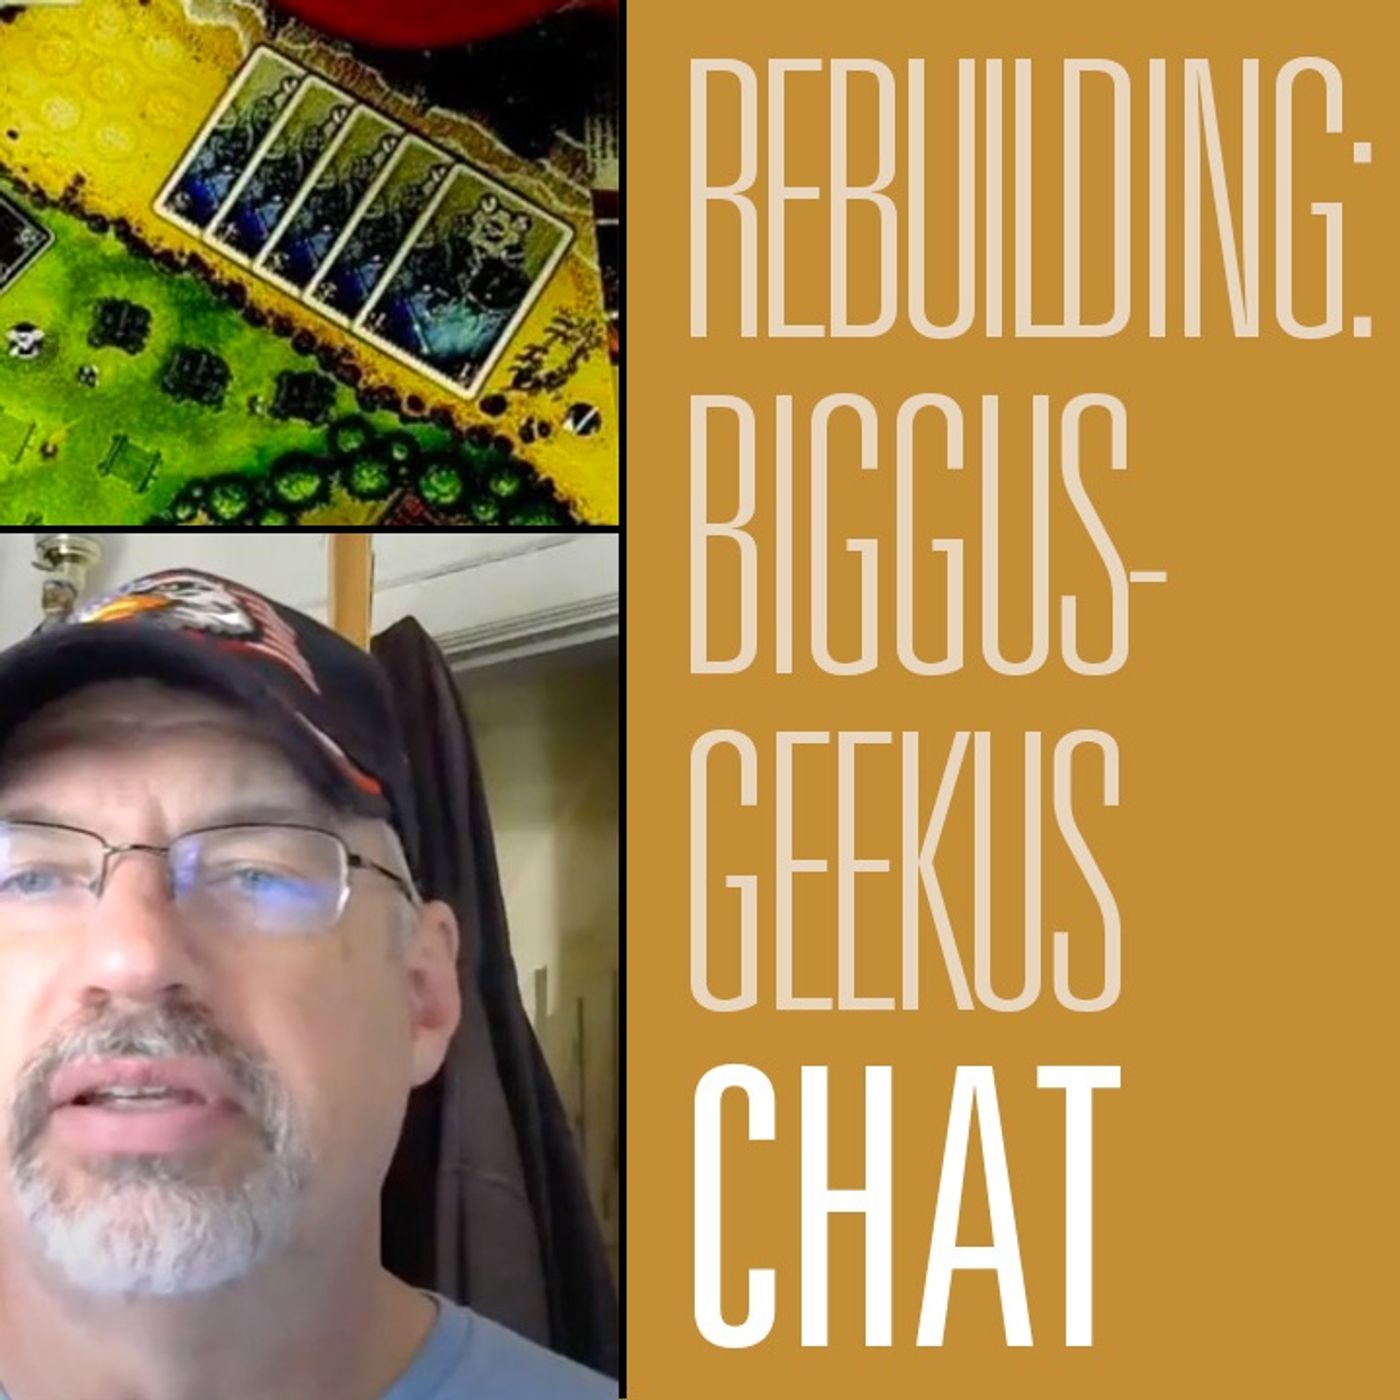 Building Alternative Markets for Tabletop Gaming With BiggusGeekus! | Fireside Chat 213